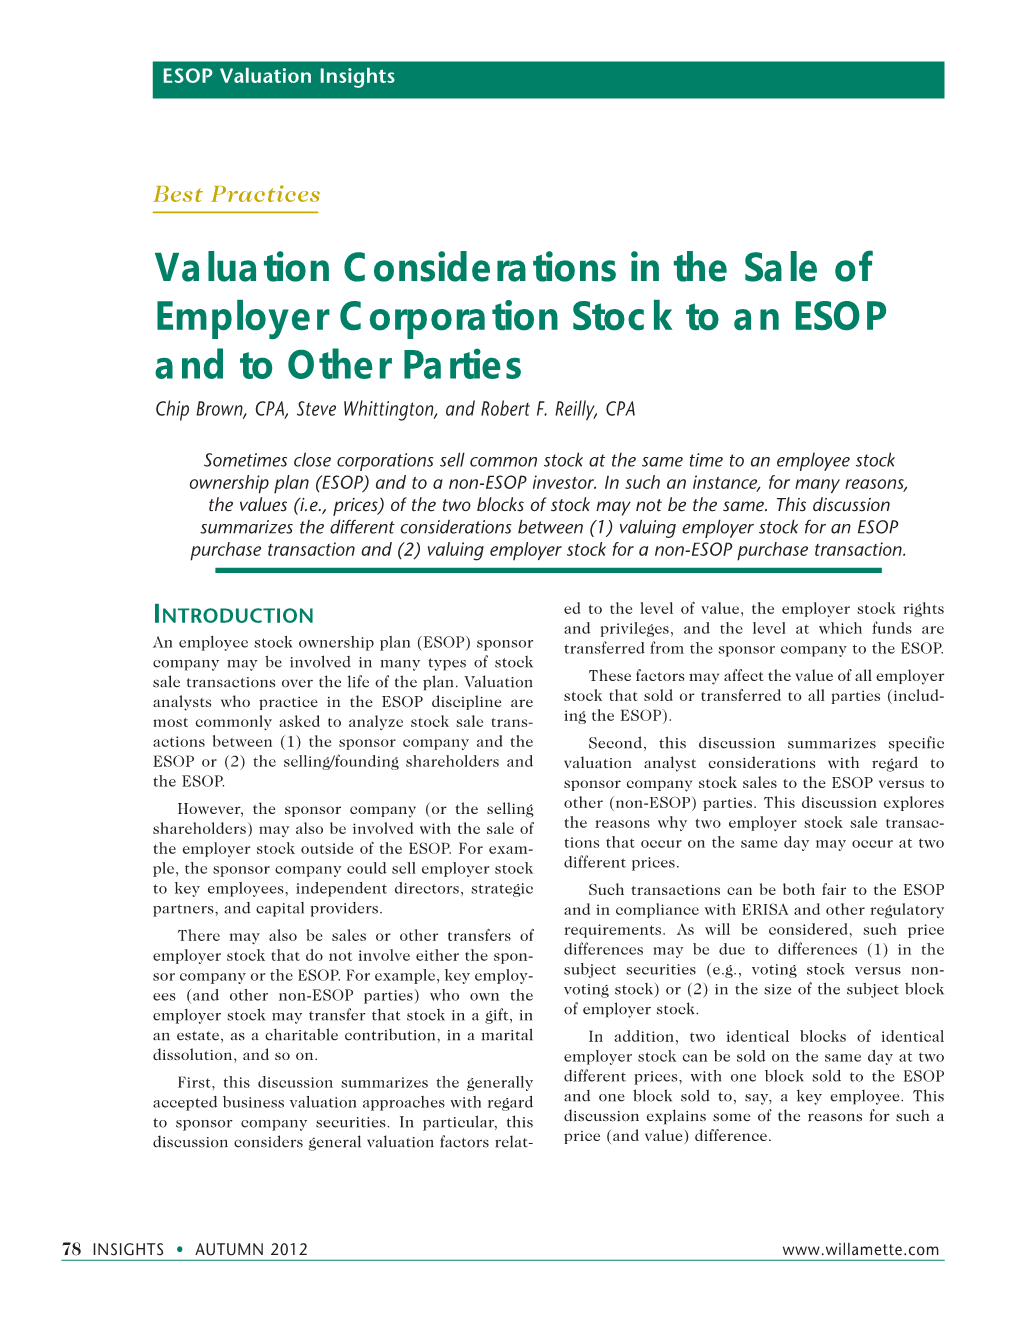 Valuation Considerations in the Sale of Employer Corporation Stock to an ESOP and to Other Parties Chip Brown, CPA, Steve Whittington, and Robert F